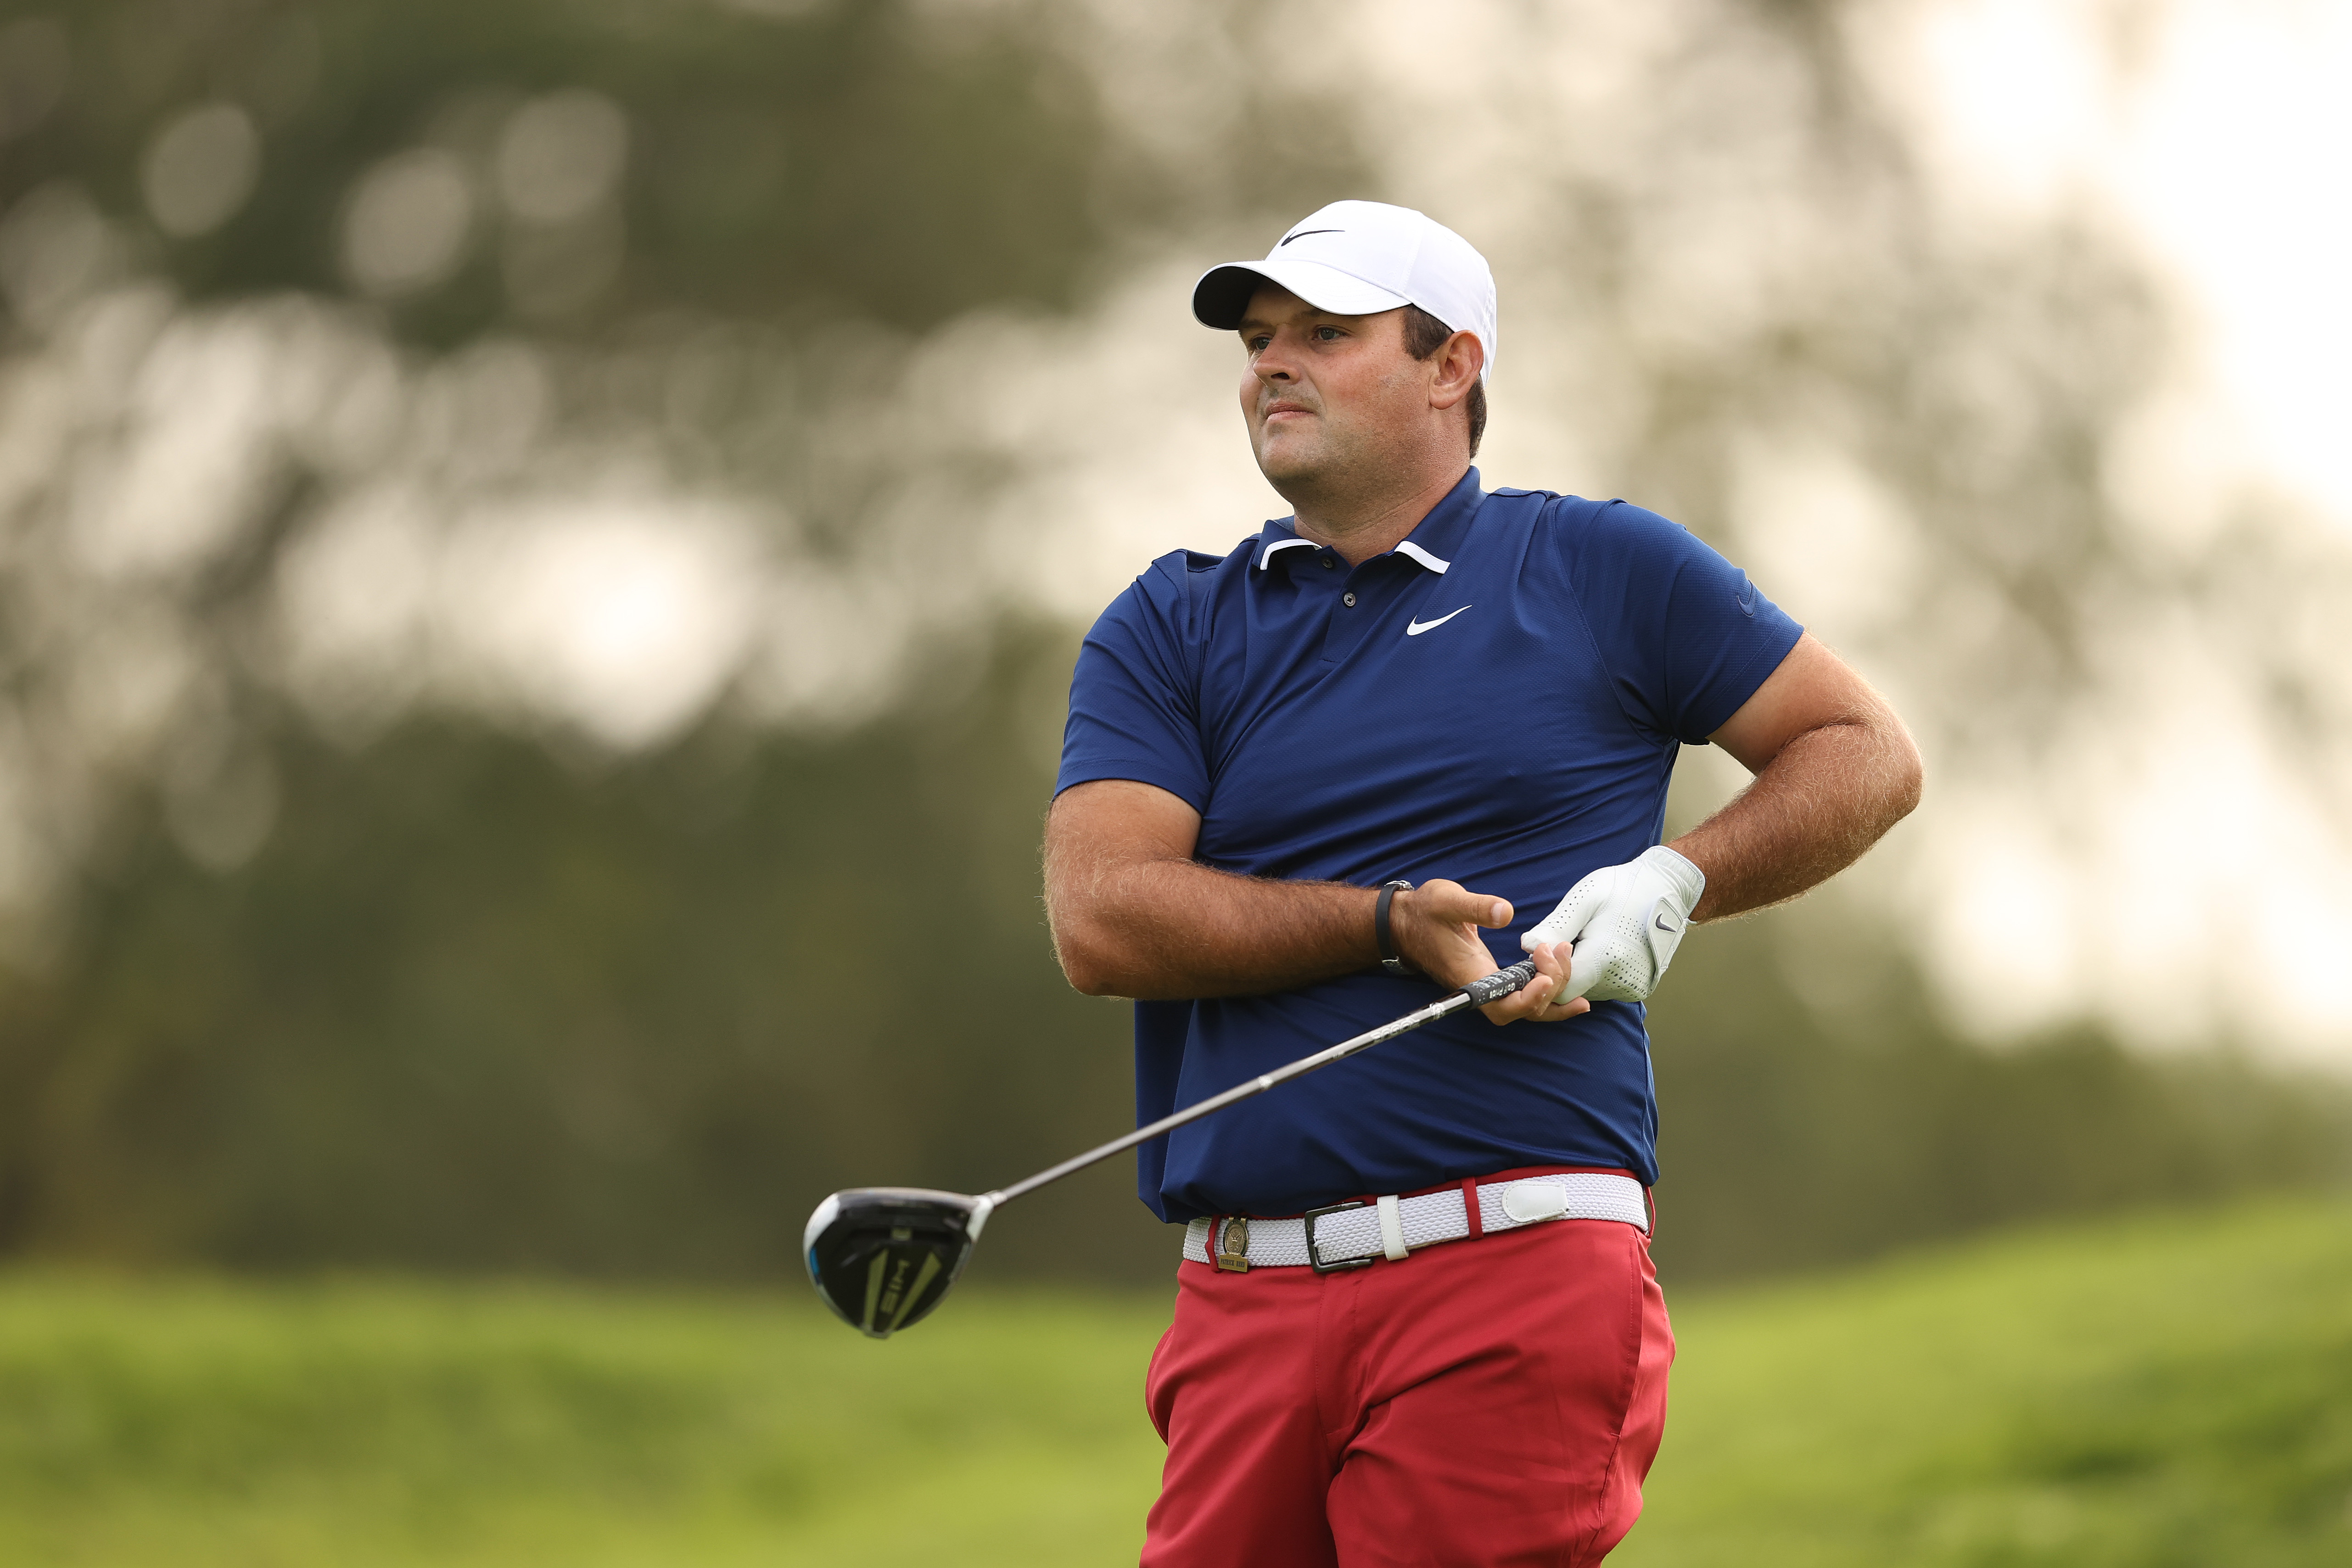 Get A Load Of This Patrick Reed ACE From Today's 1st Round At The U.S